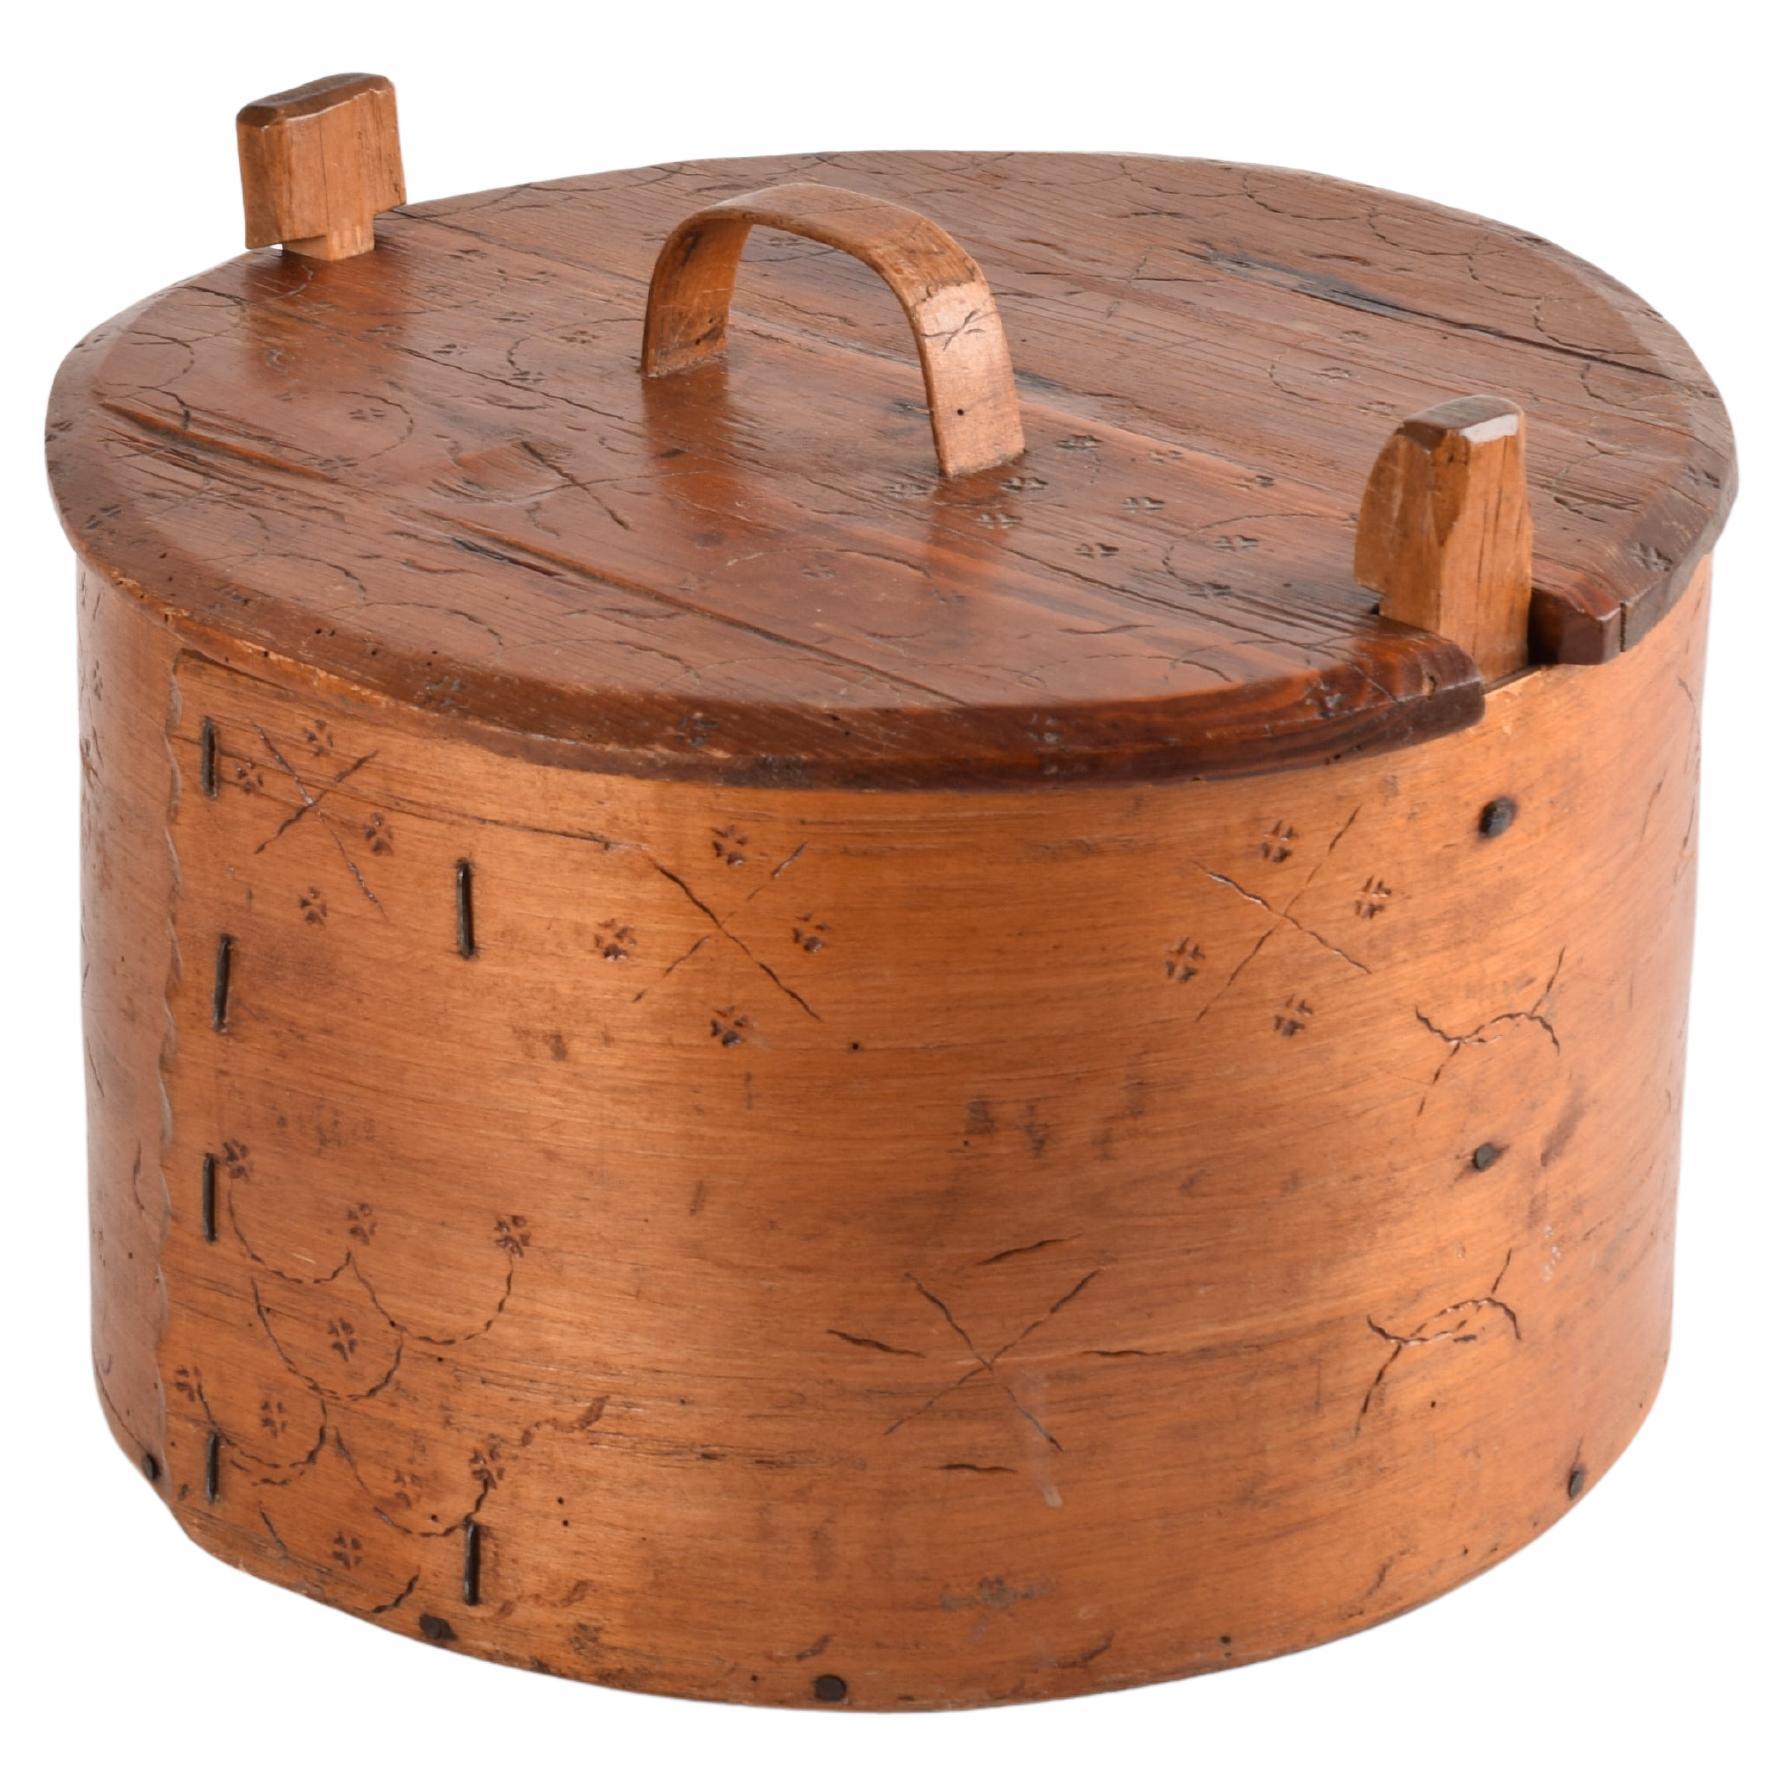 Antique Scandinavian Round Storage Box “Tejne” Decorated Pine, Late 19th Century For Sale